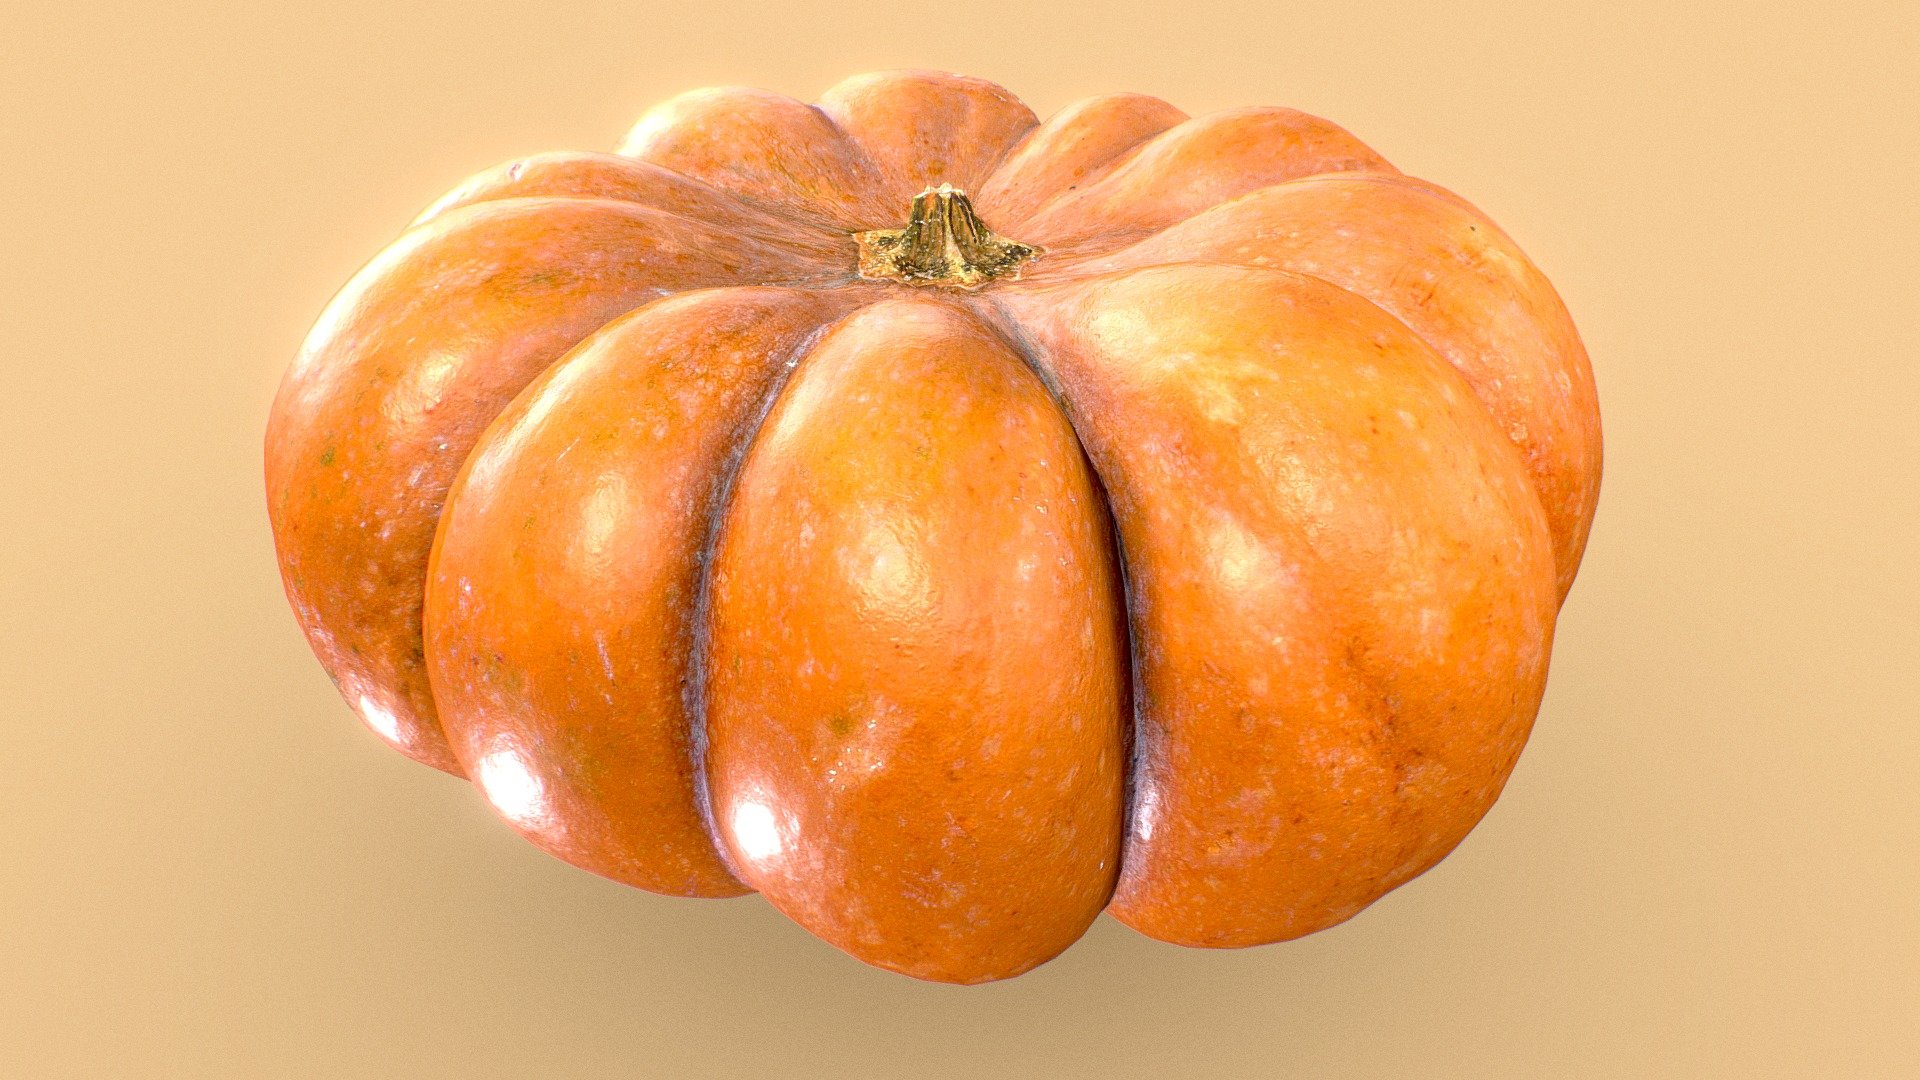 High-quality, photorealistic 3D scaned model of a pumpkin. Optimized topology and uv unwrapped.

Object description:
Pumpkin Musque de Provence, Cinderella Pumpkin, French Pumpkin

General info:




Scan made in studio lighting with high-quality DSLR camera

Clean delighted, cross polarized albdeo without shadows, flare and reflections

Light and optimized Mesh and UV

Already prepared 8k, 4k, and 2k textures

Texture maps included:




Ambient occlusion 16 bits png

Base Color 8 bit jpeg

Curvature 16 bits png

Normal map 16 bits png

Position 16 bits png

Roughness 16 bits png

Thickness 16 bits png

World space normal 16 bits png

Tasty bonus:
- 16k Base Color from raw scan
- 8k 32bit Displacment map
- RAW scan mesh in .ztl format 12 milions poly

I always try to achieve the highest possible quality, if you have any questions, wishes or difficulties, please contact me.

contact me if you need raw scan https://www.artstation.com/truekit - Pumpkin - Buy Royalty Free 3D model by truekit 3d model